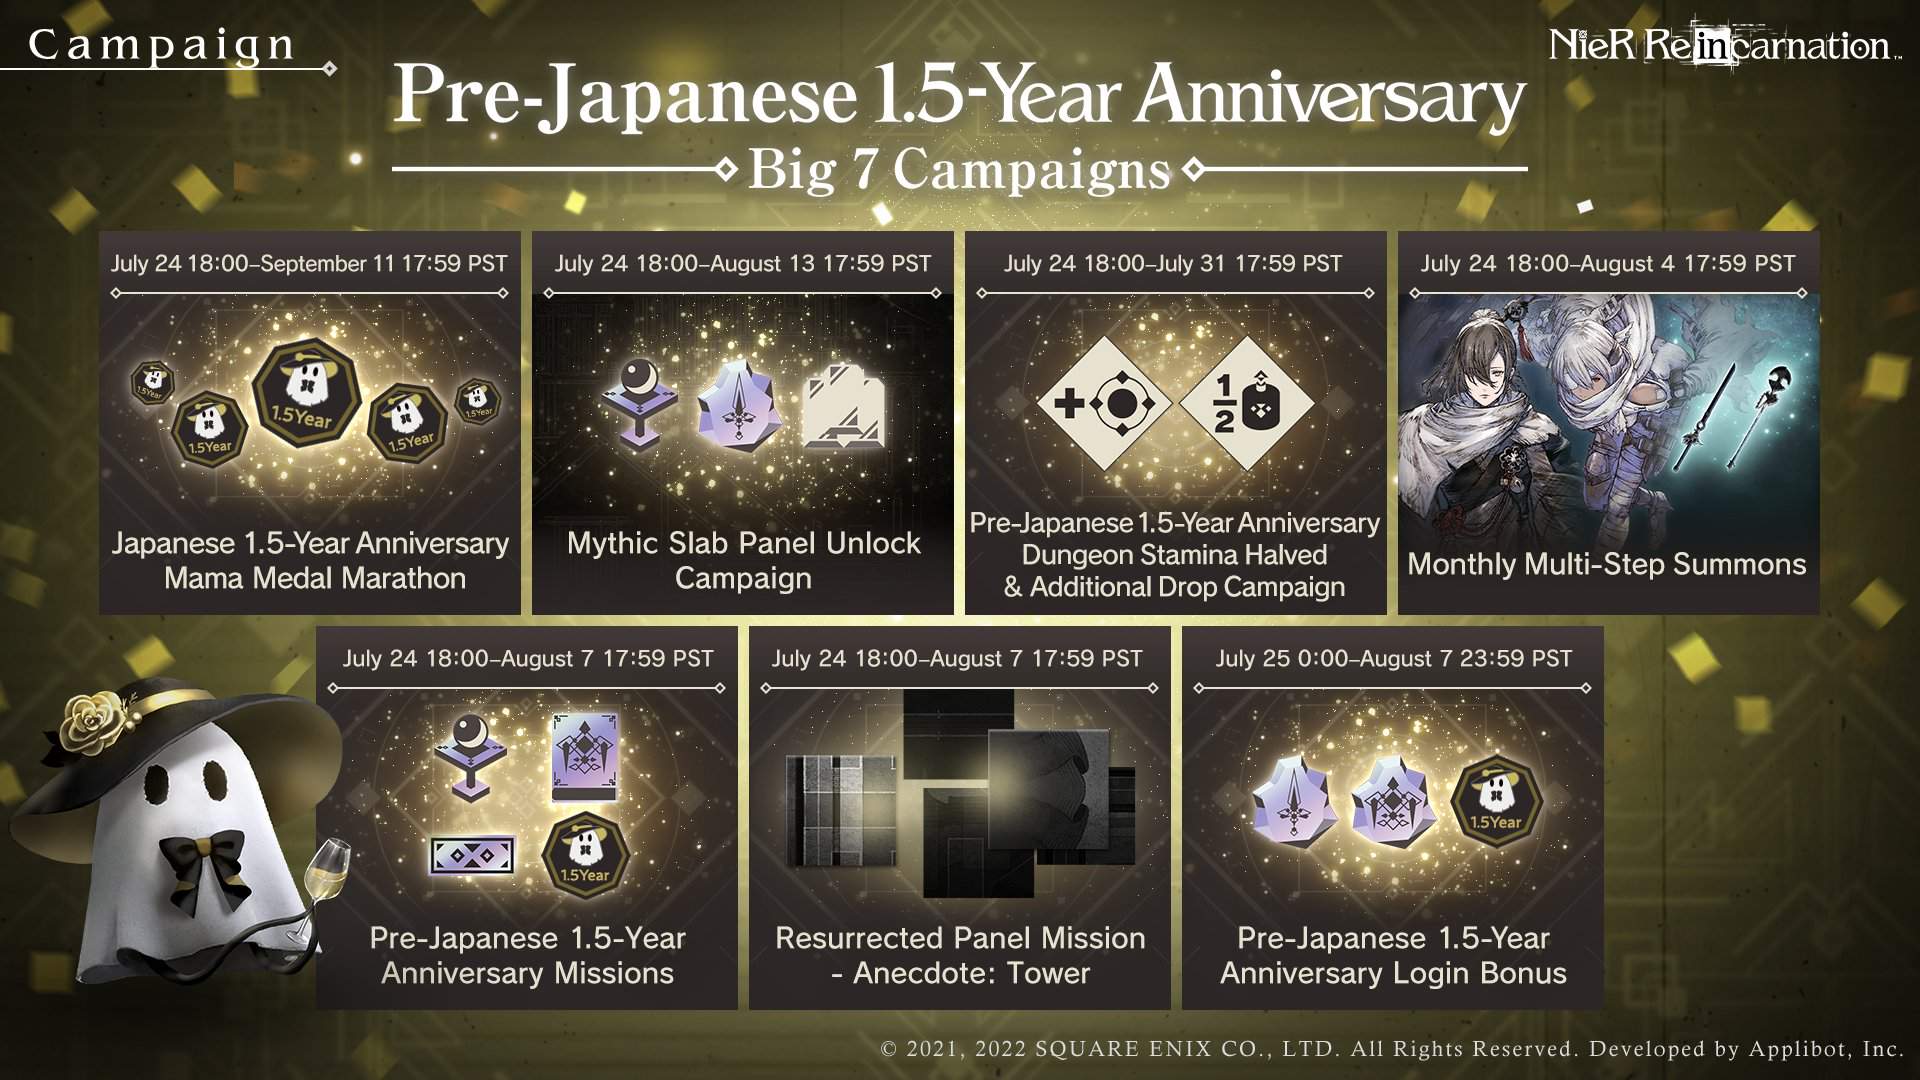 Big 7 Campaigns for the upcoming global celebration of the Japanese 1.5-year anniversary